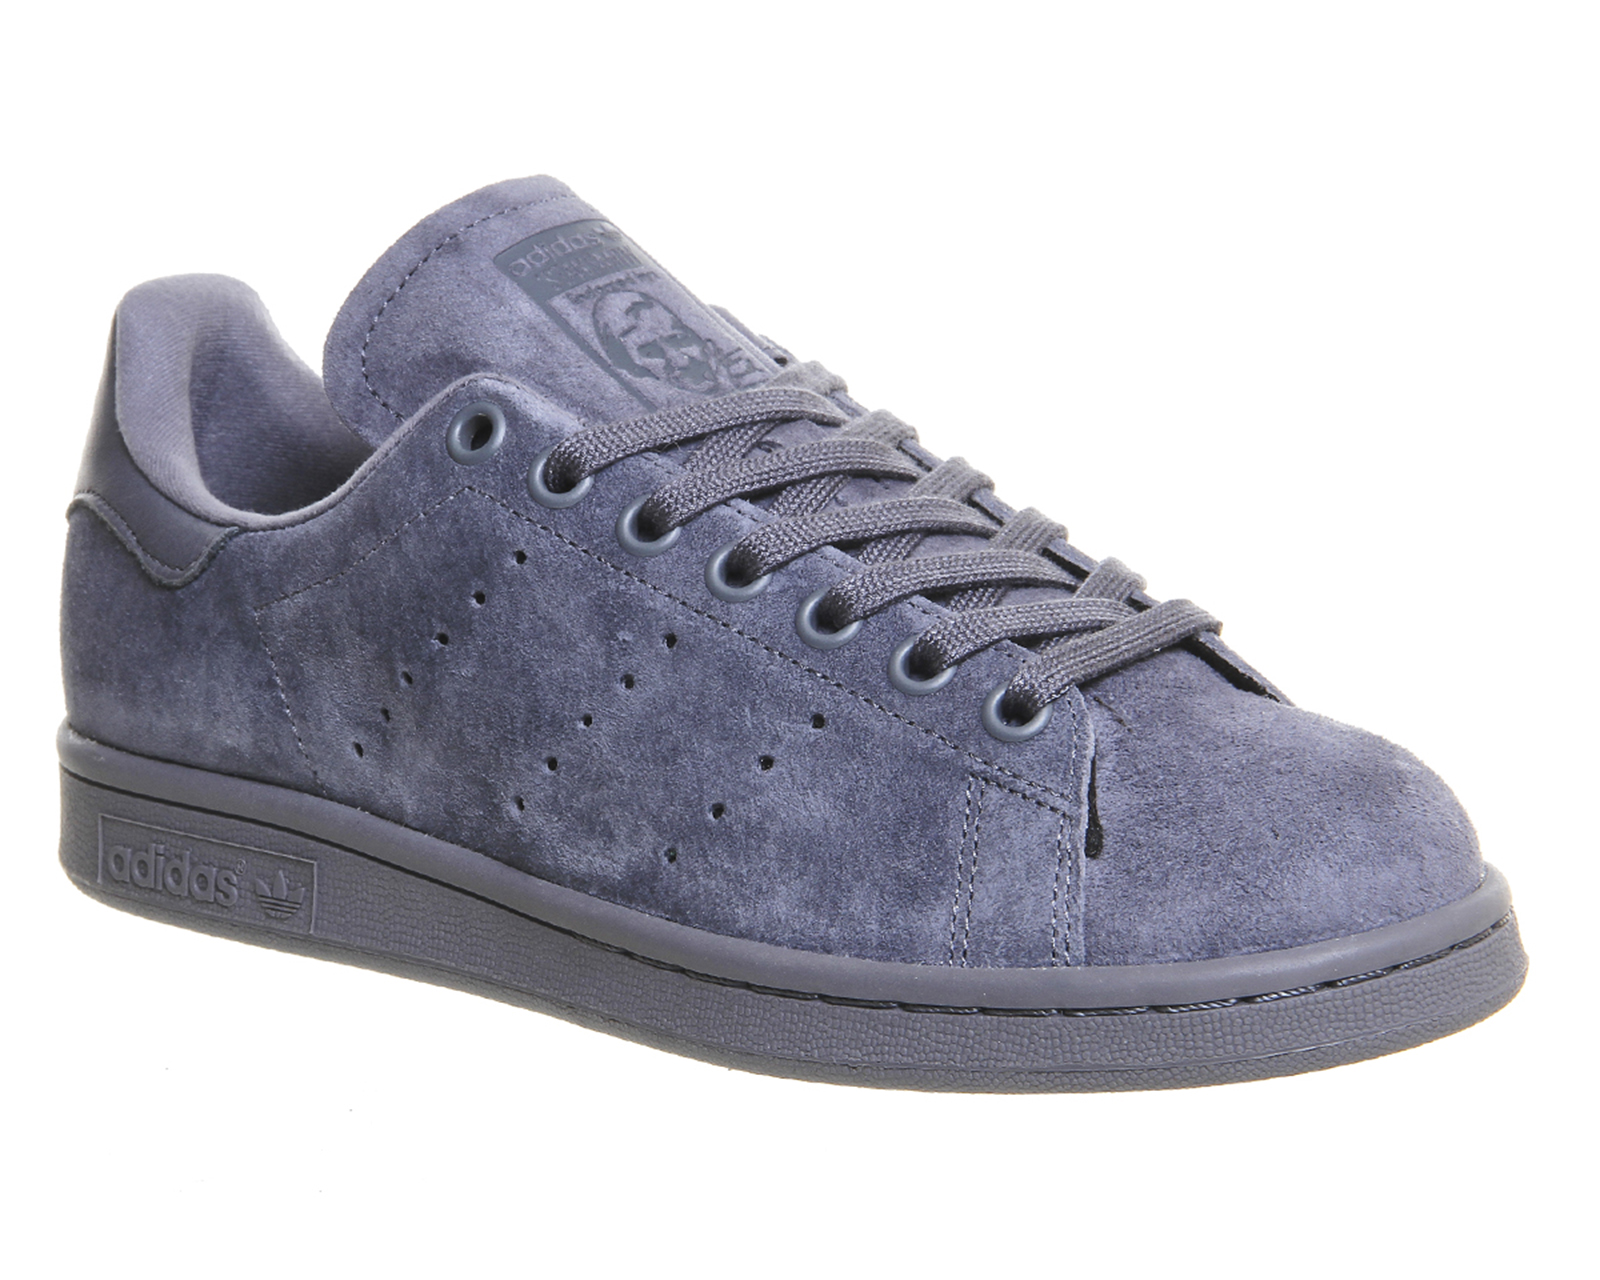 Adidas Stan Smith All Black Suede Shop, GET 58% OFF, cleavereast.ie